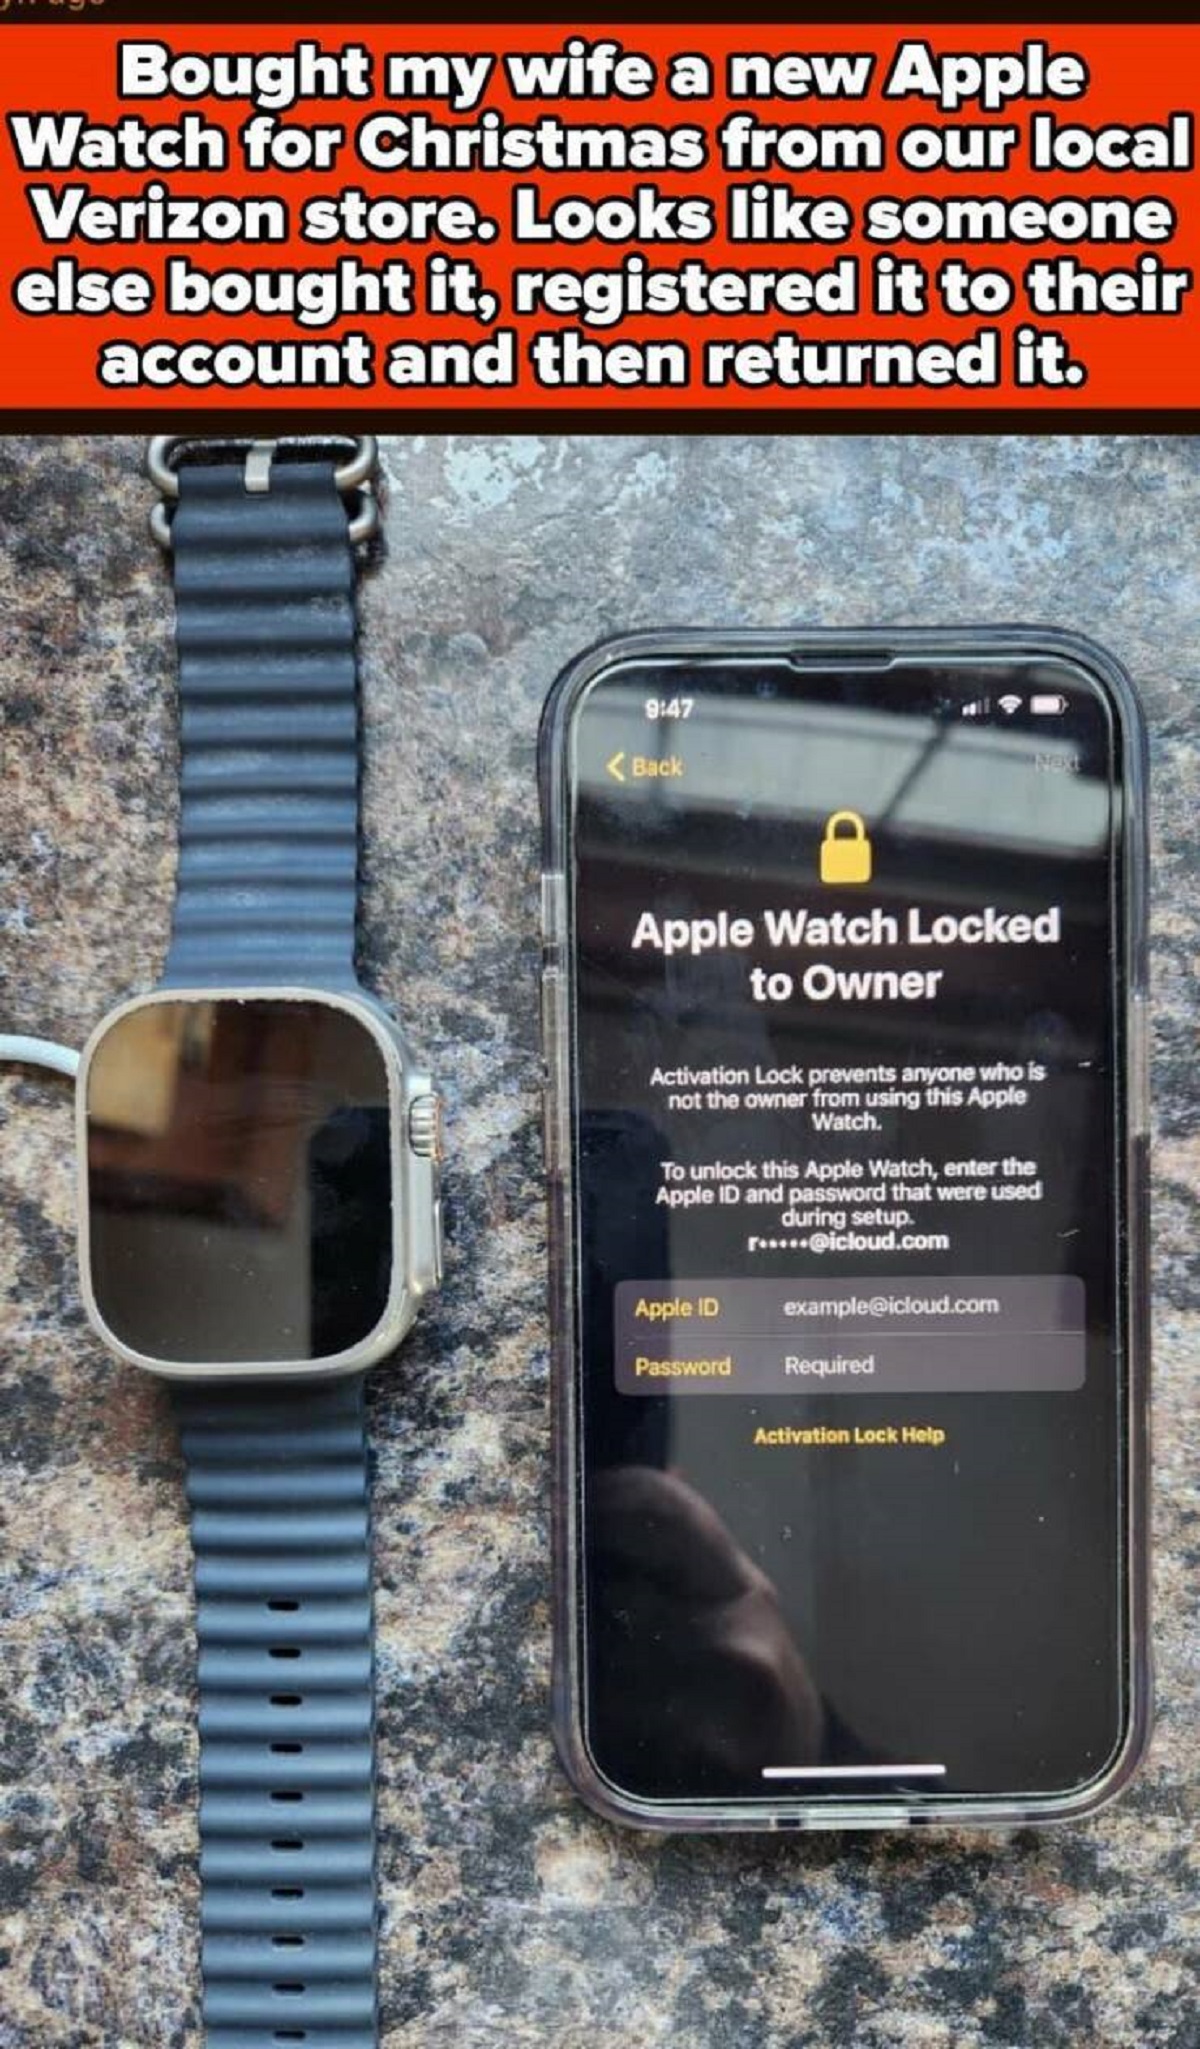 smartphone - Bought my wife a new Apple Watch for Christmas from our local Verizon store. Looks someone else bought it, registered it to their account and then returned it. Apple Watch Locked to Owner Apple Touck Apple Watch, entert Apple during sup